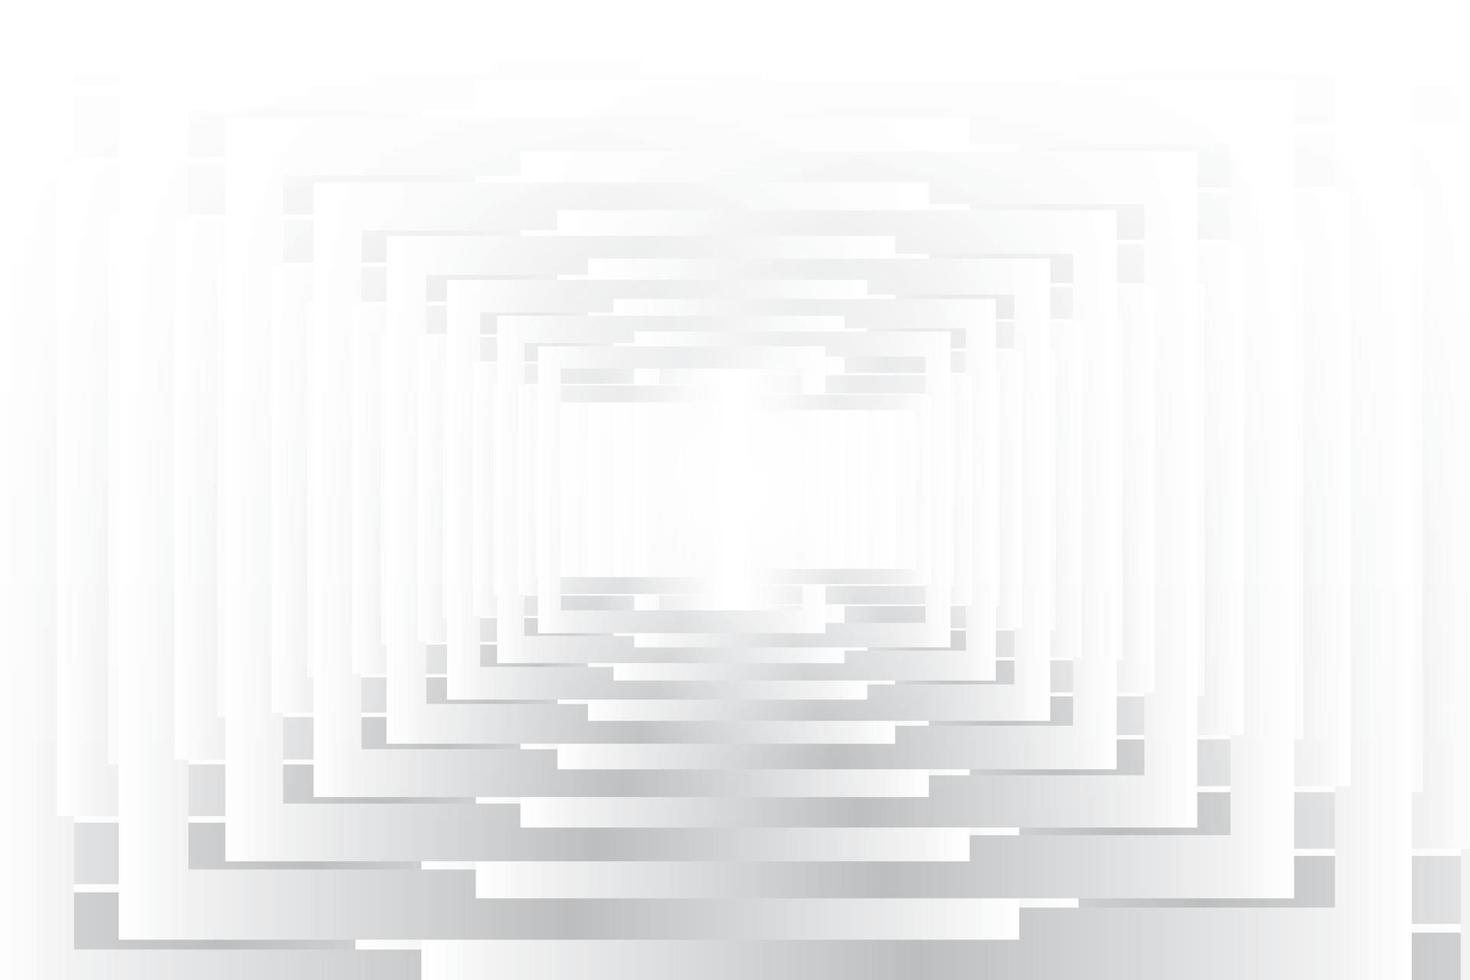 Abstract geometric white and gray color background. Vector illustration.